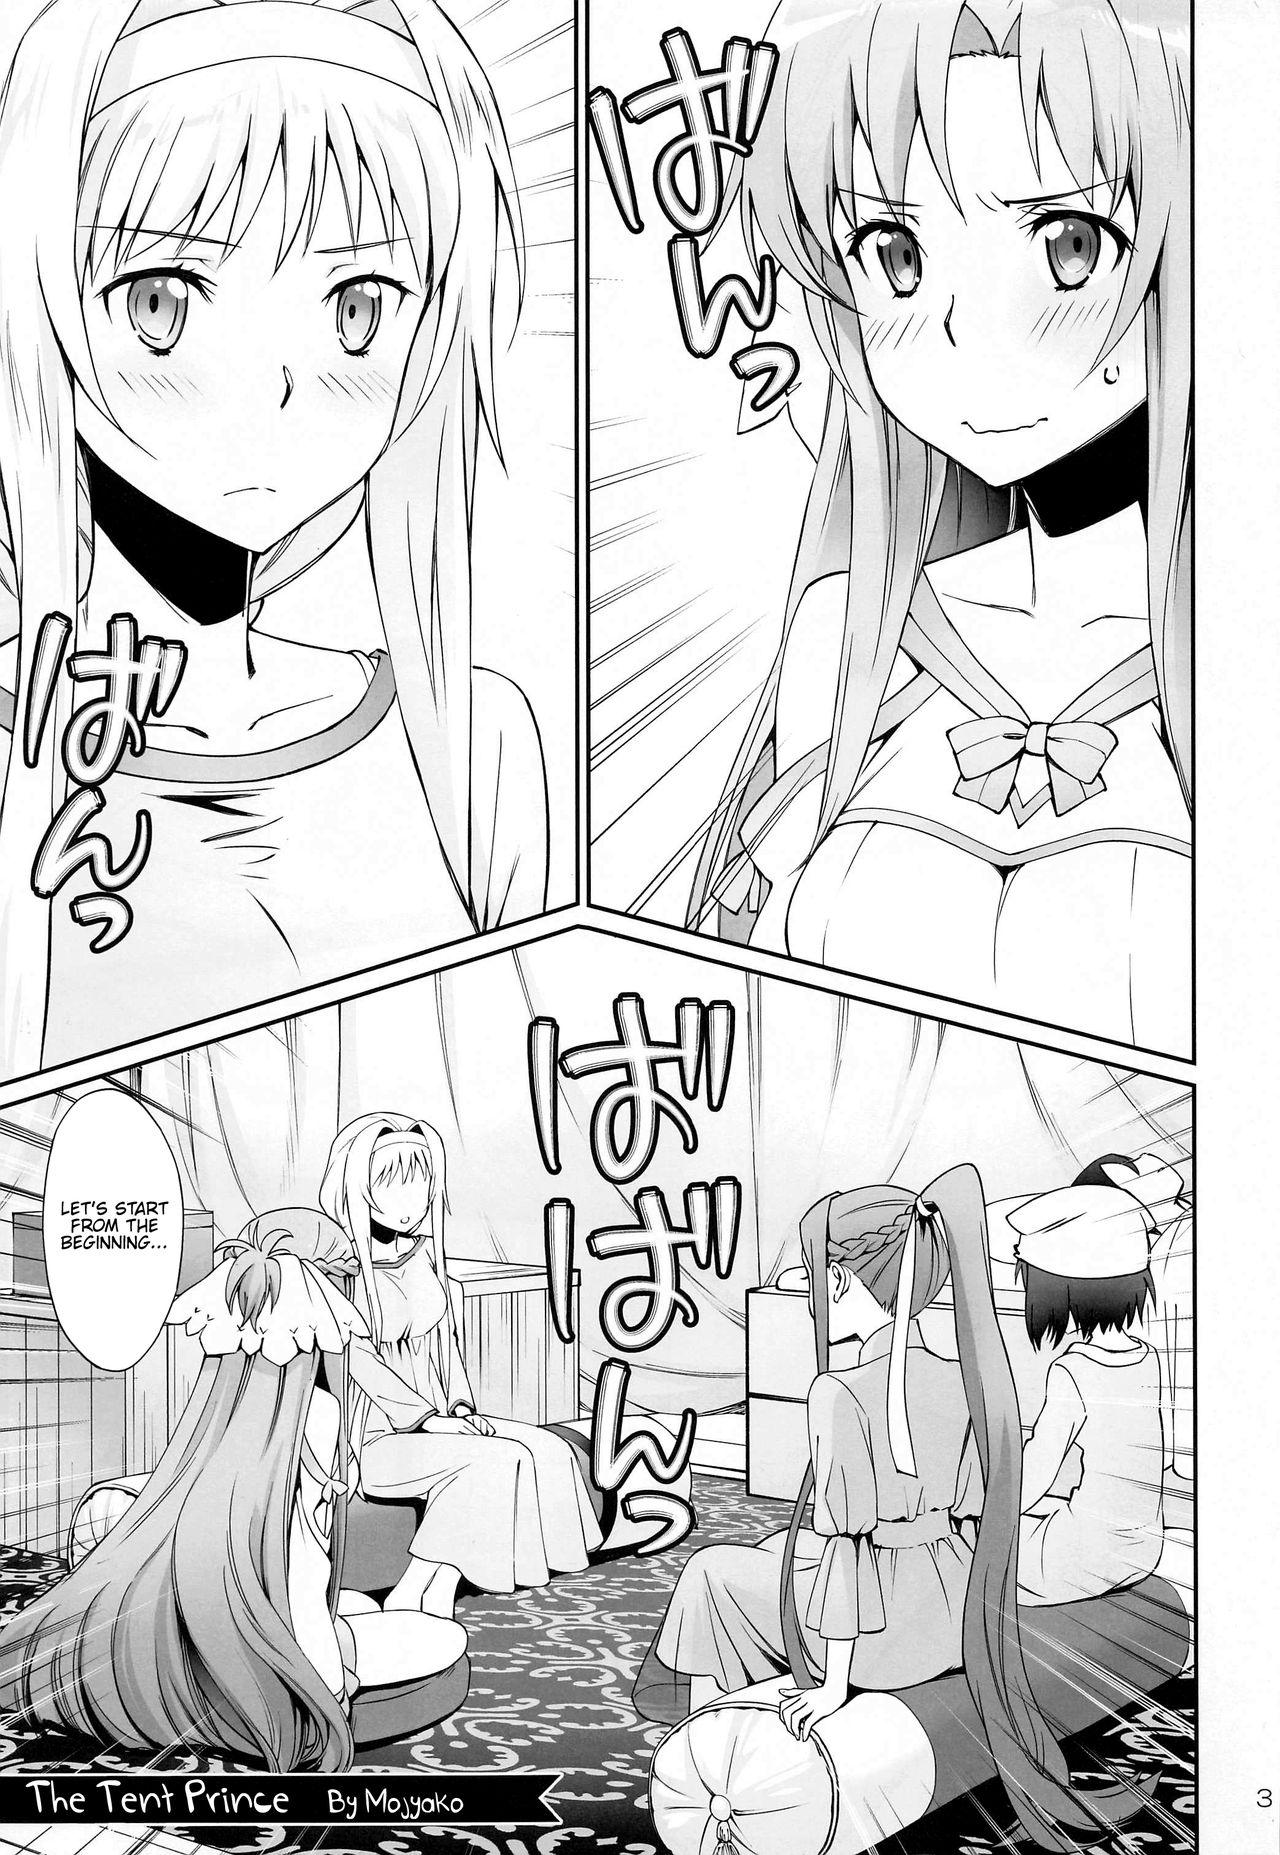 Feet Tent no Ouji-sama - Sword art online Brother - Page 2